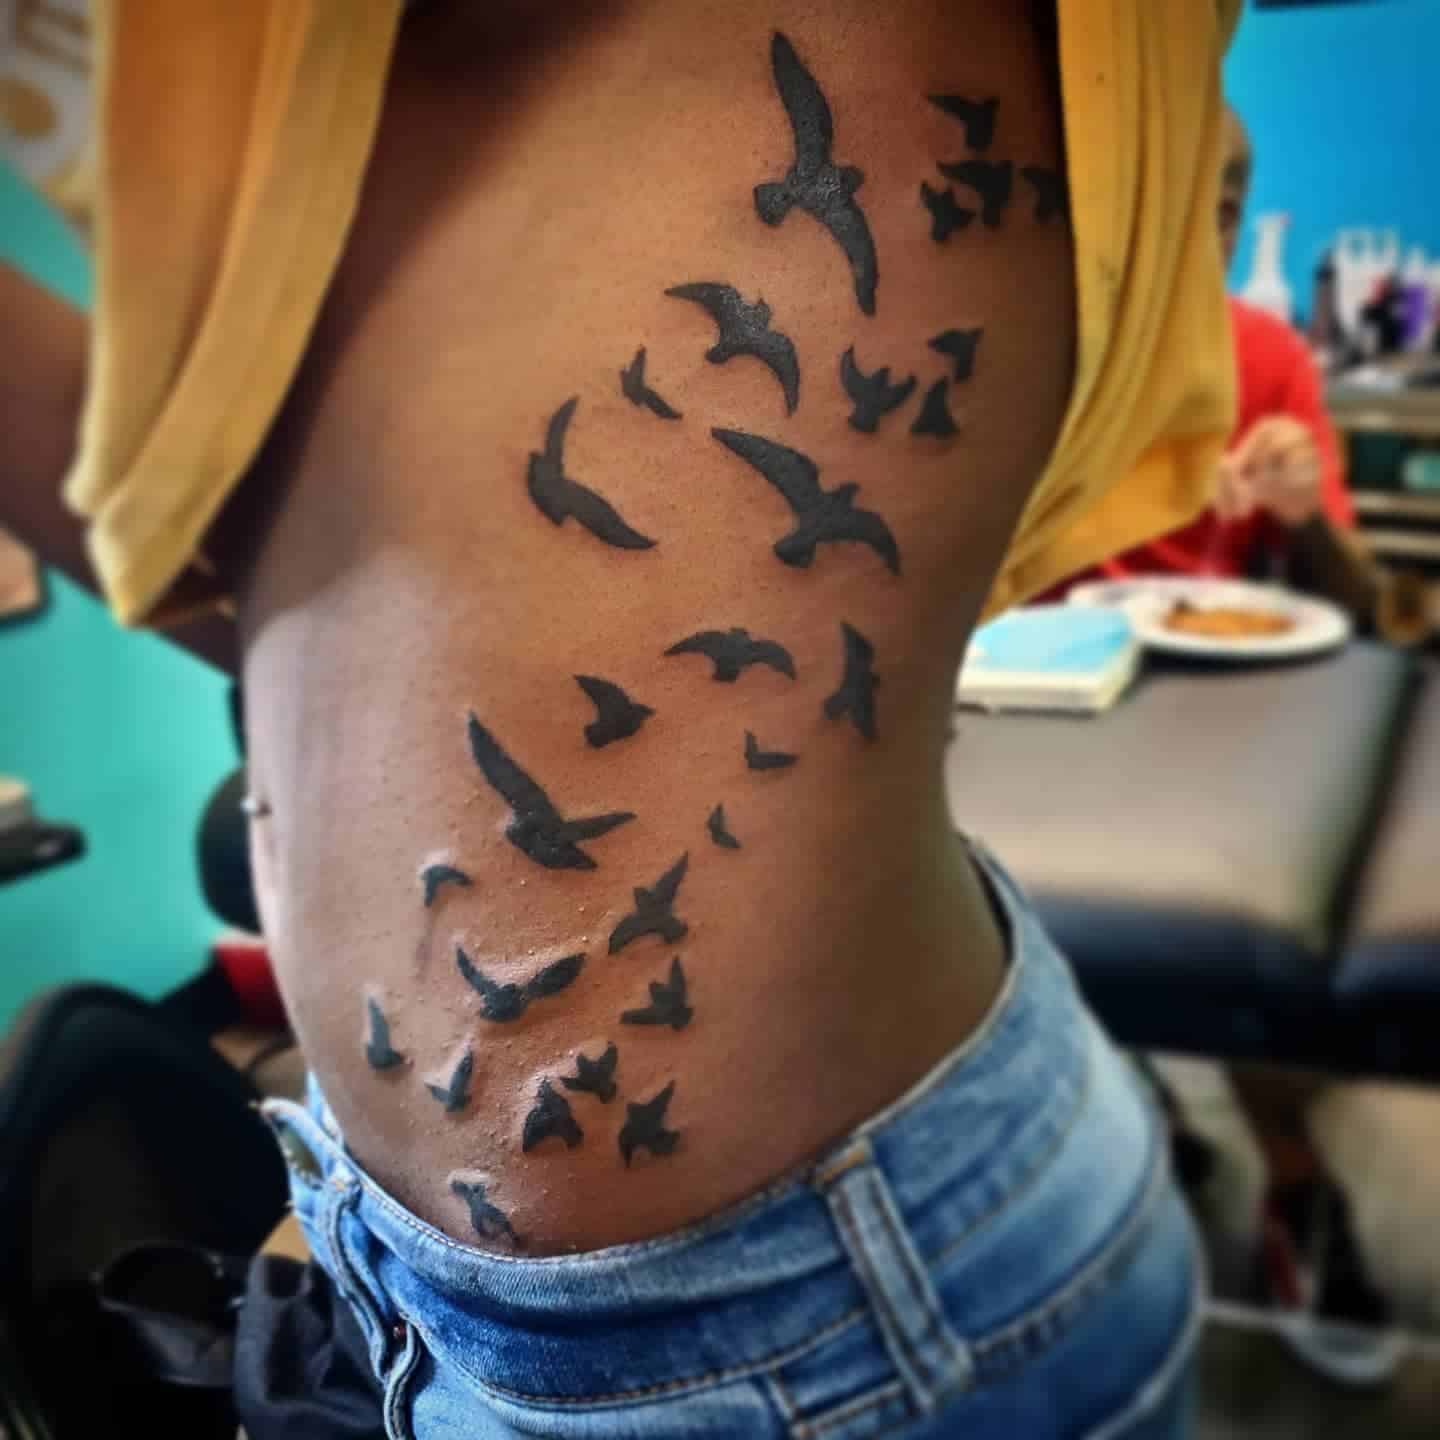 60+ Best Bird Tattoo Design Ideas and Their Meanings (2023 Updated) - Saved Tattoo